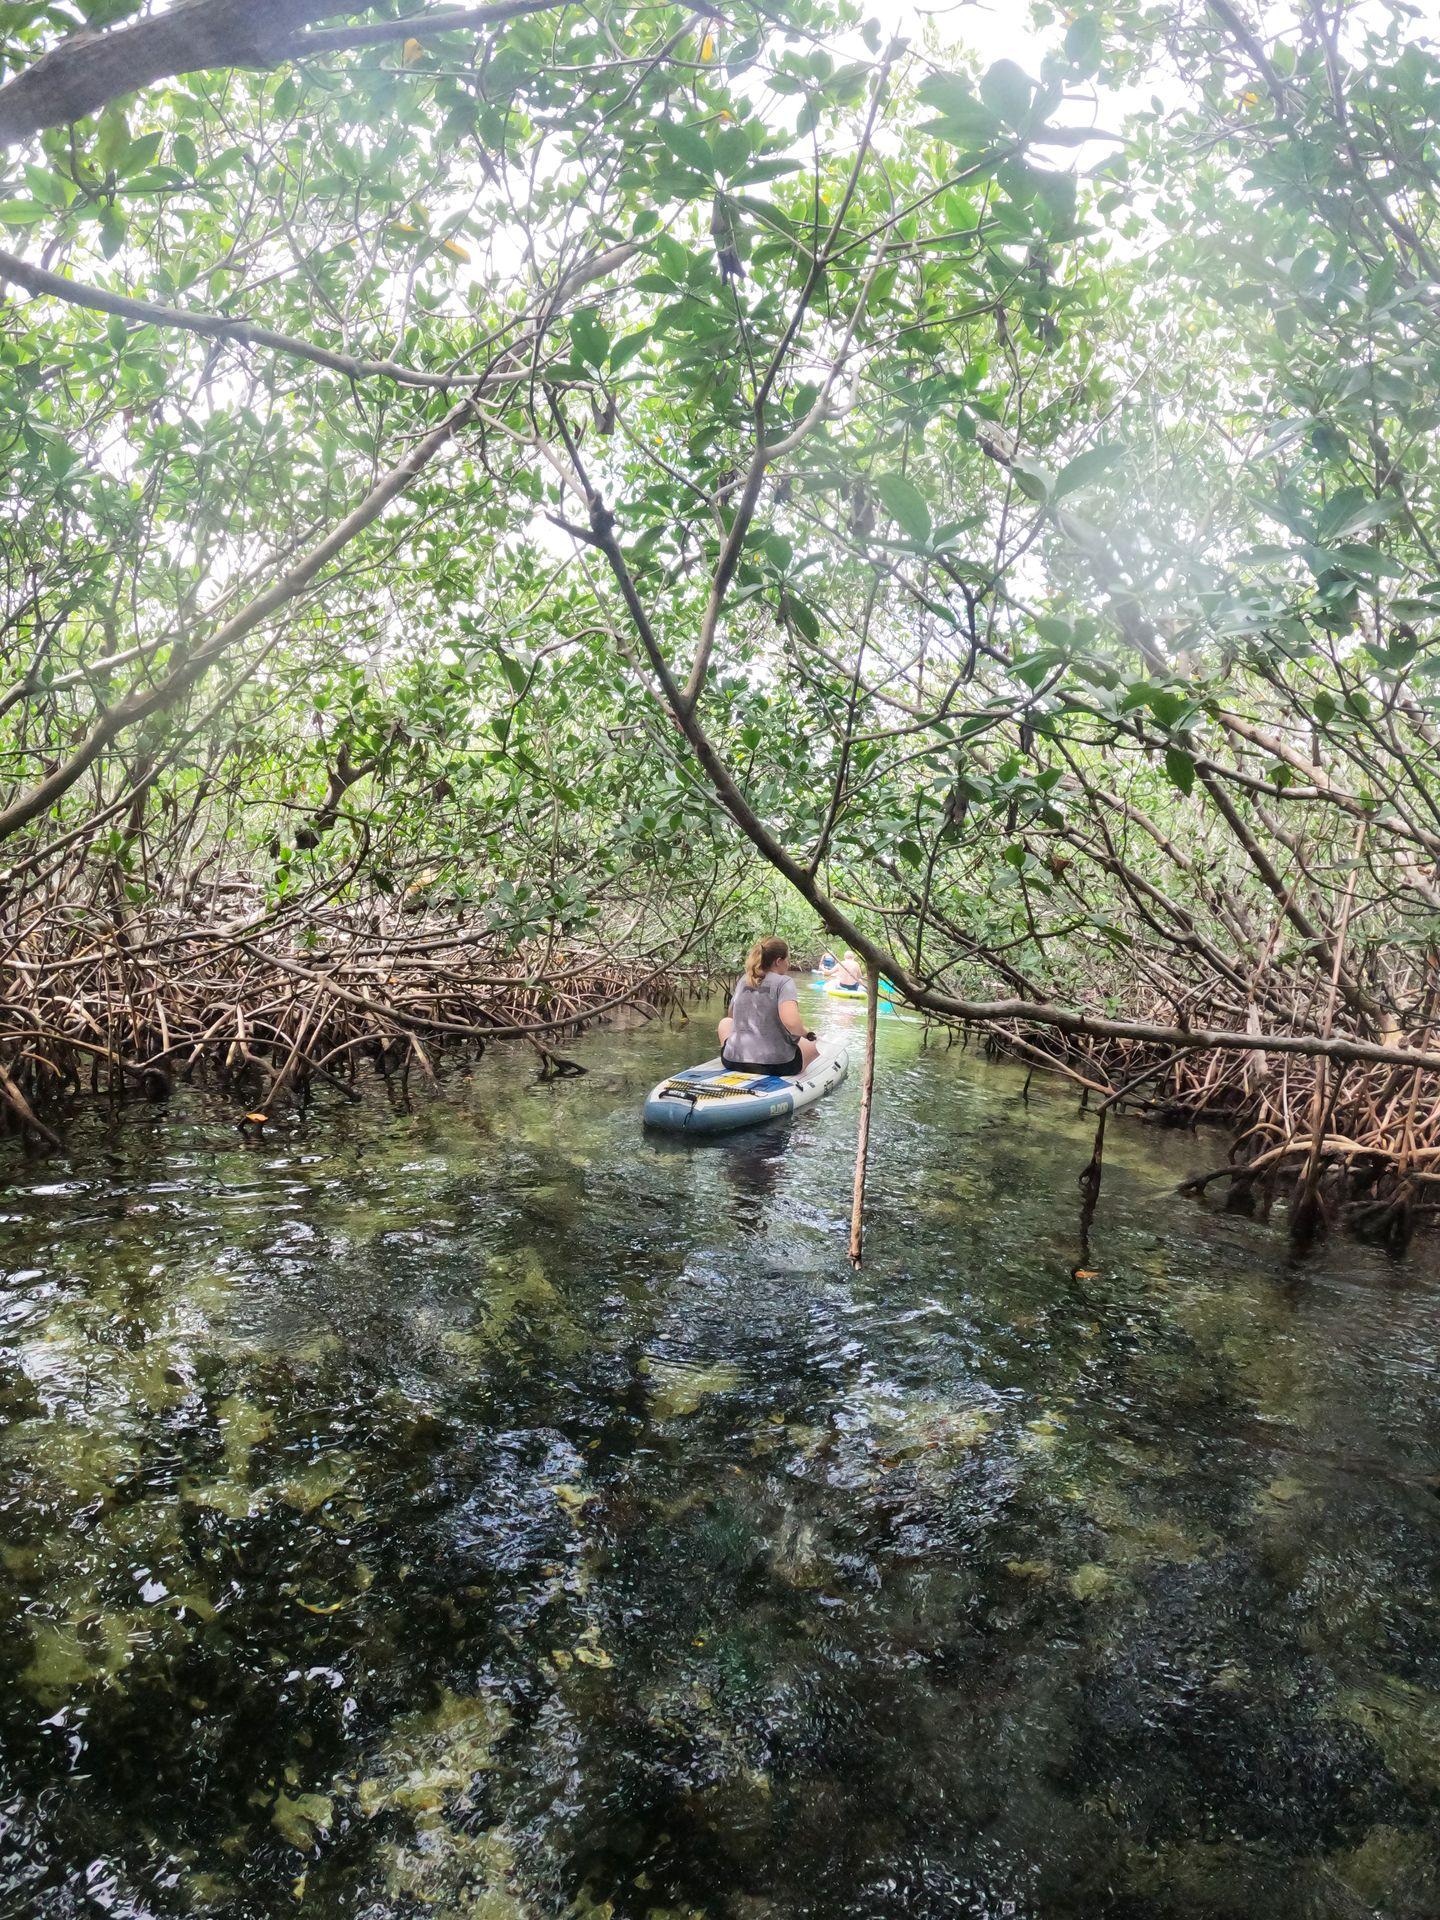 Lydia sitting on top of paddle board and paddling through a mangrove tunnel in Biscayne National Park.